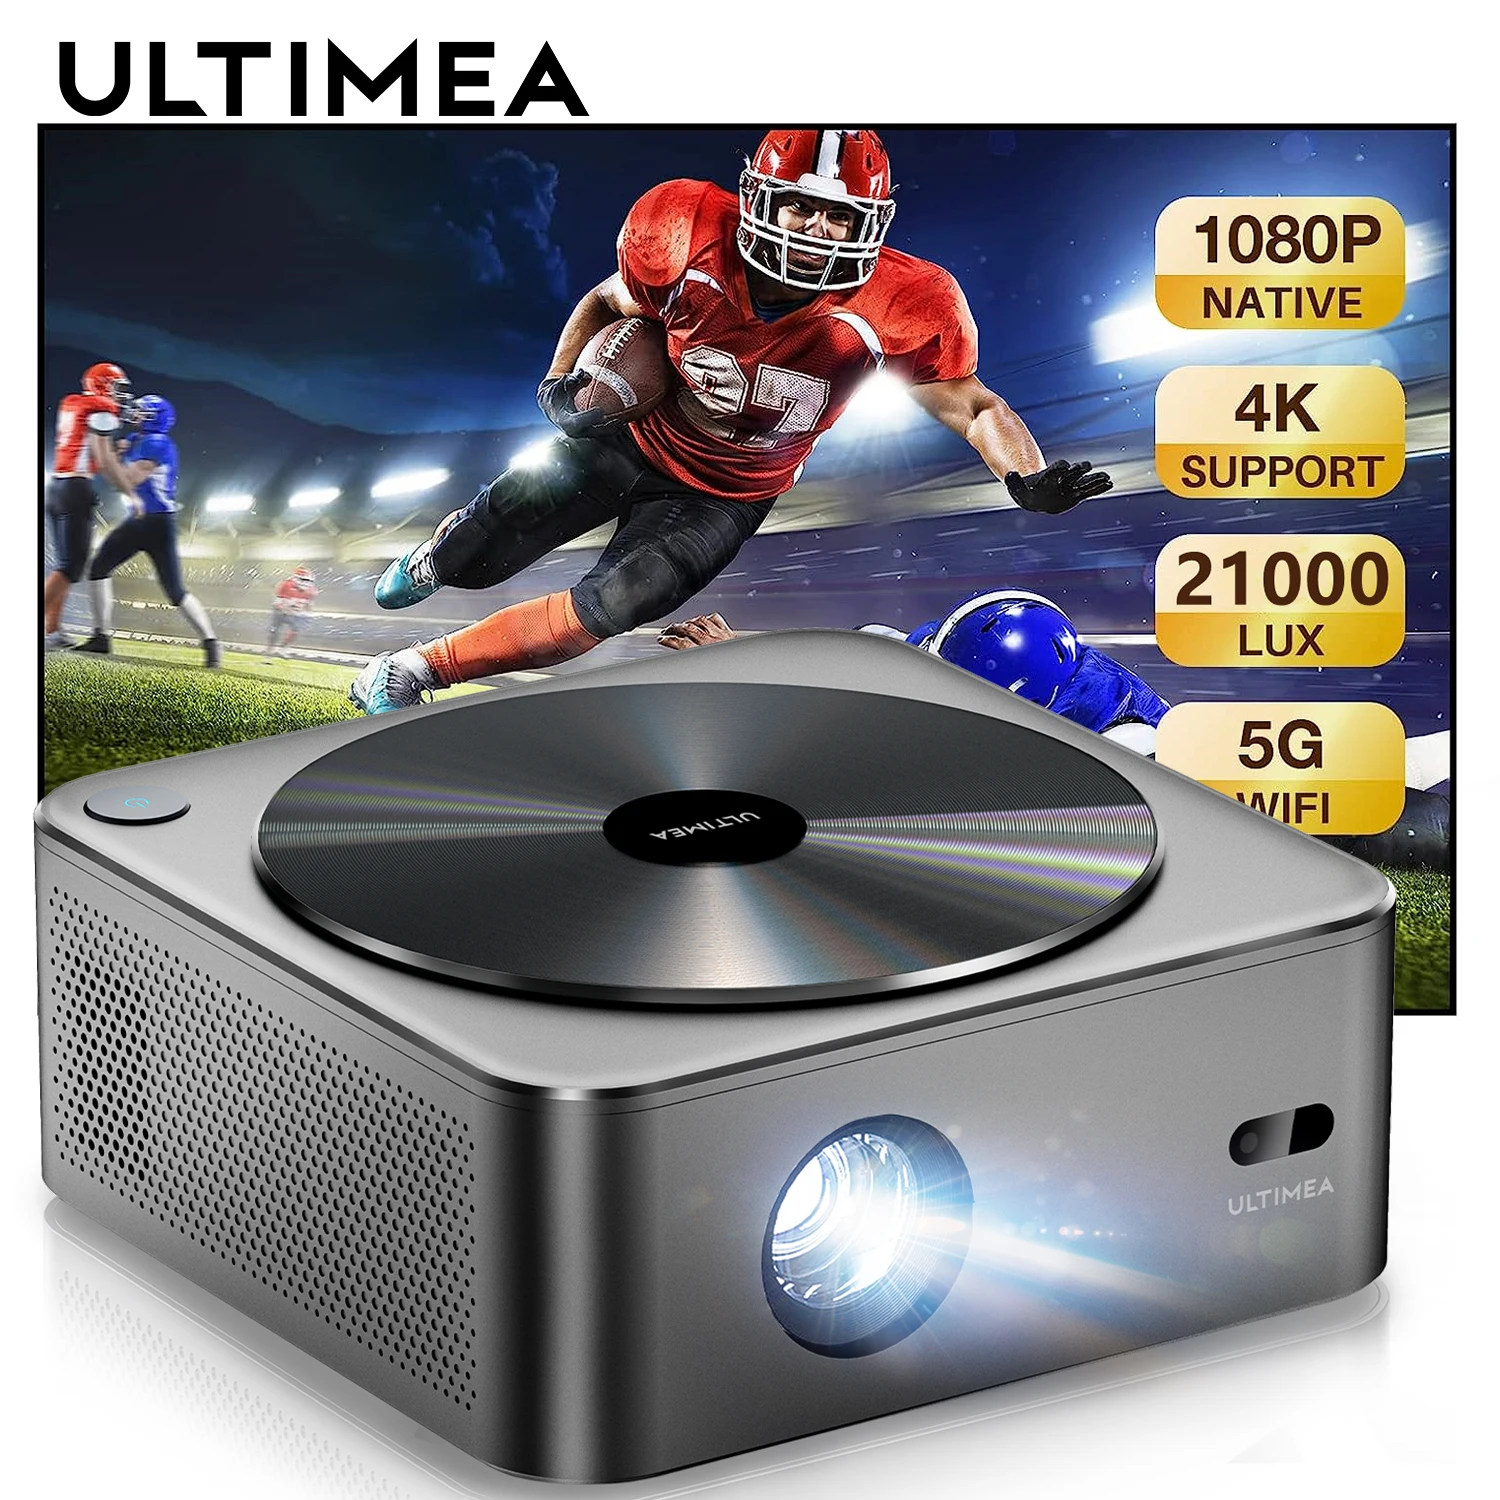 

ULTIMEA Native 1080P Full HD Projector LED 4K WiFi Bluetooth Proyector with Auto Focus PK DLP Video Smart Home Theater Projector